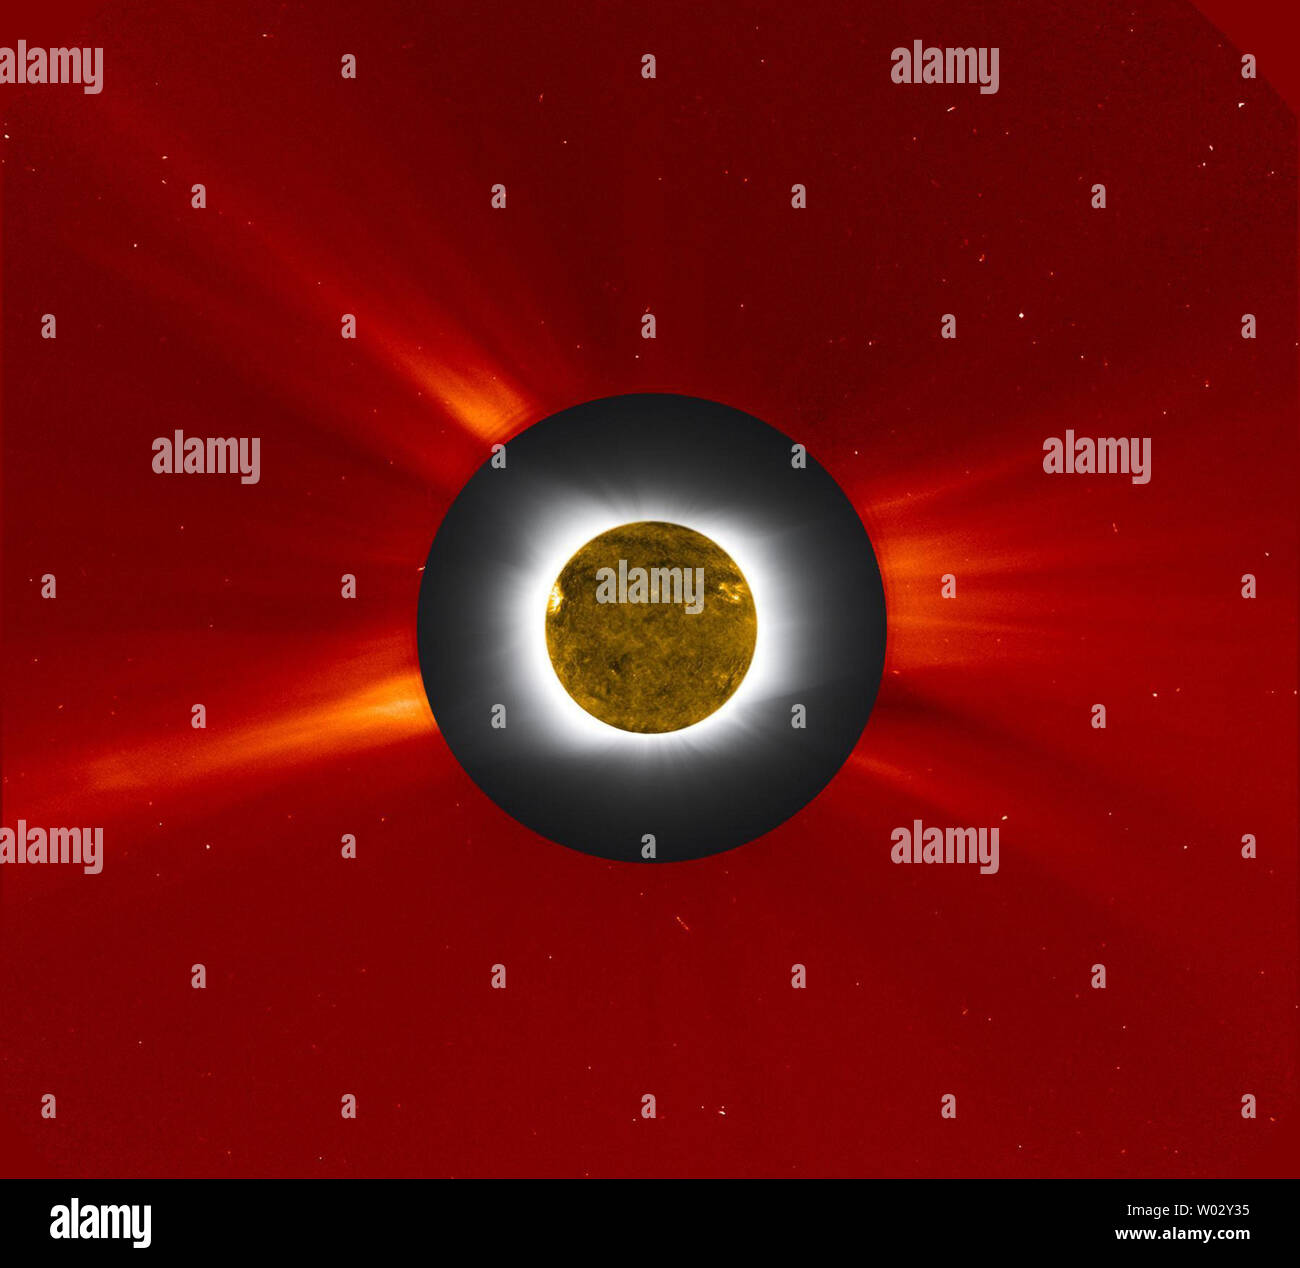 This NASA composite image shows the new moon passed directly in front of the sun, causing a total solar eclipse in the South Pacific, July 11, 2010. In this image, the solar eclipse is shown in gray and white from a photo provided by the Williams College Expedition to Easter Island and was embedded with an image of the sun’s outer corona taken by the Large Angle Spectrometric Coronagraph (LASCO) on the SOHO spacecraft and shown in red false color. LASCO uses a disk to blot out the bright sun and the inner corona so that the faint outer corona can be monitored and studied. Further, the dark sil Stock Photo